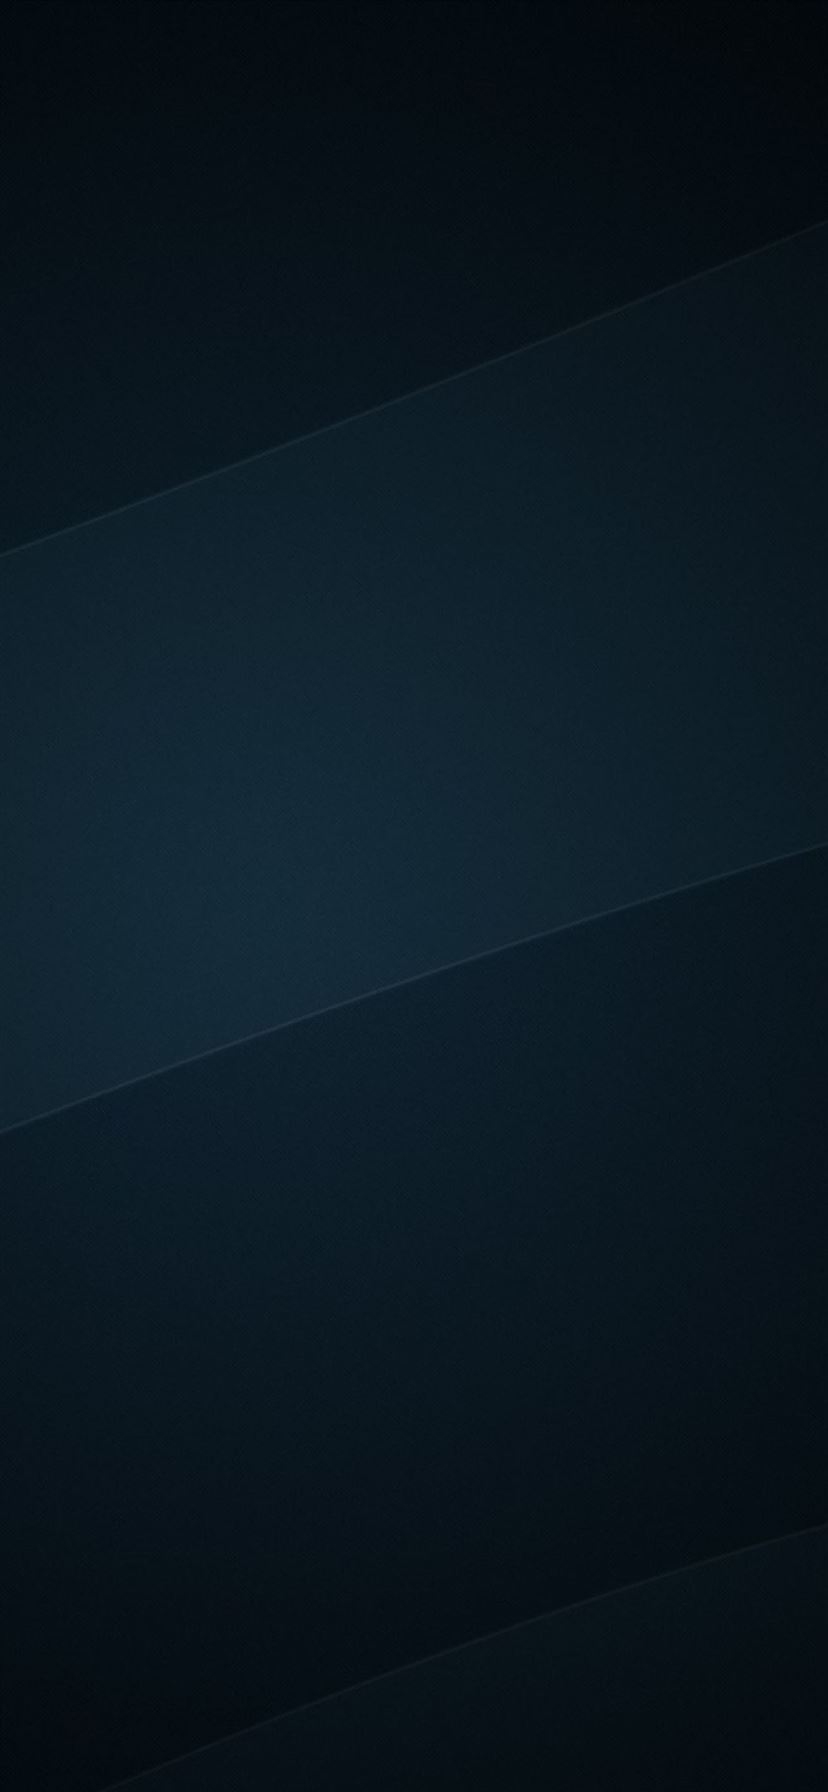 Black and blue abstract 4K wallpaper download